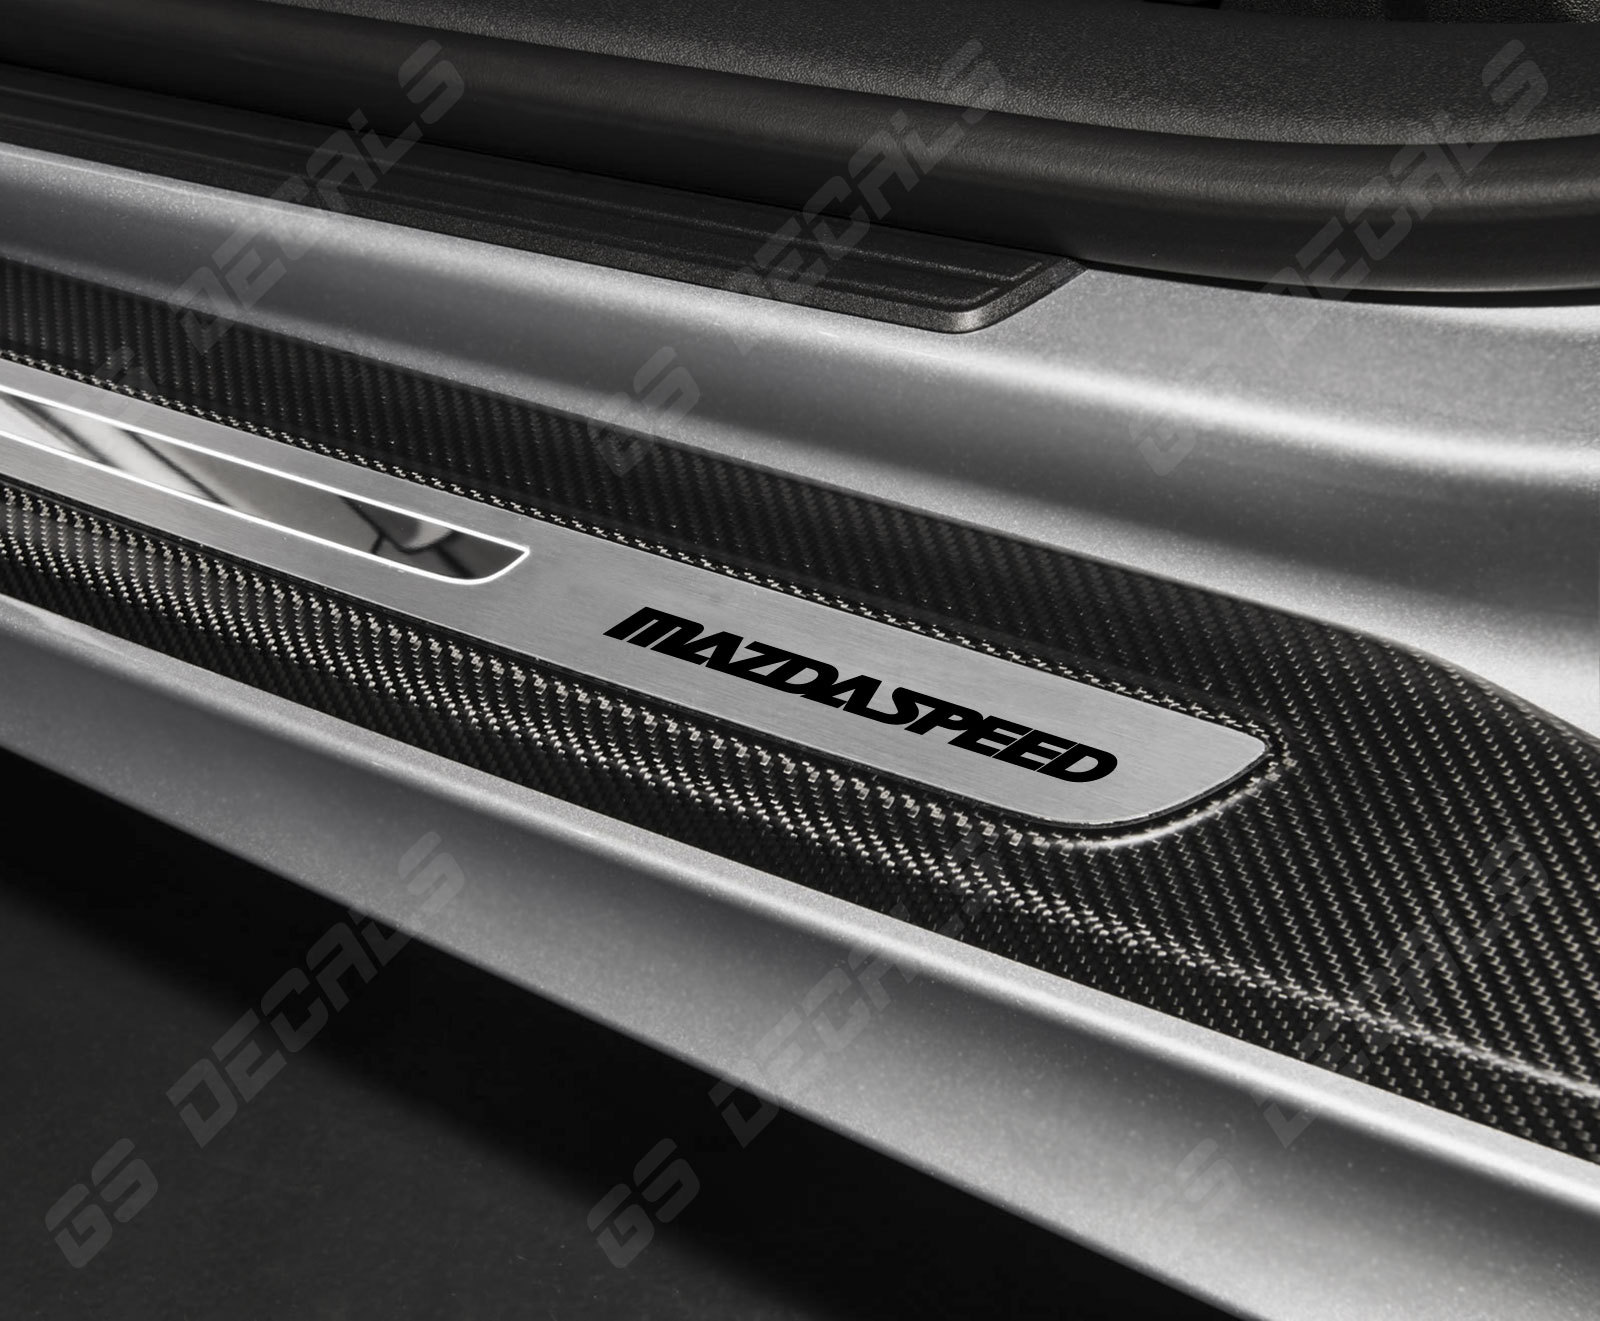 MazdaSpeed Logo Door Sill Decals Stickers Premium Quality 5 Colors MPS MX-5 RX-8 - £8.79 GBP